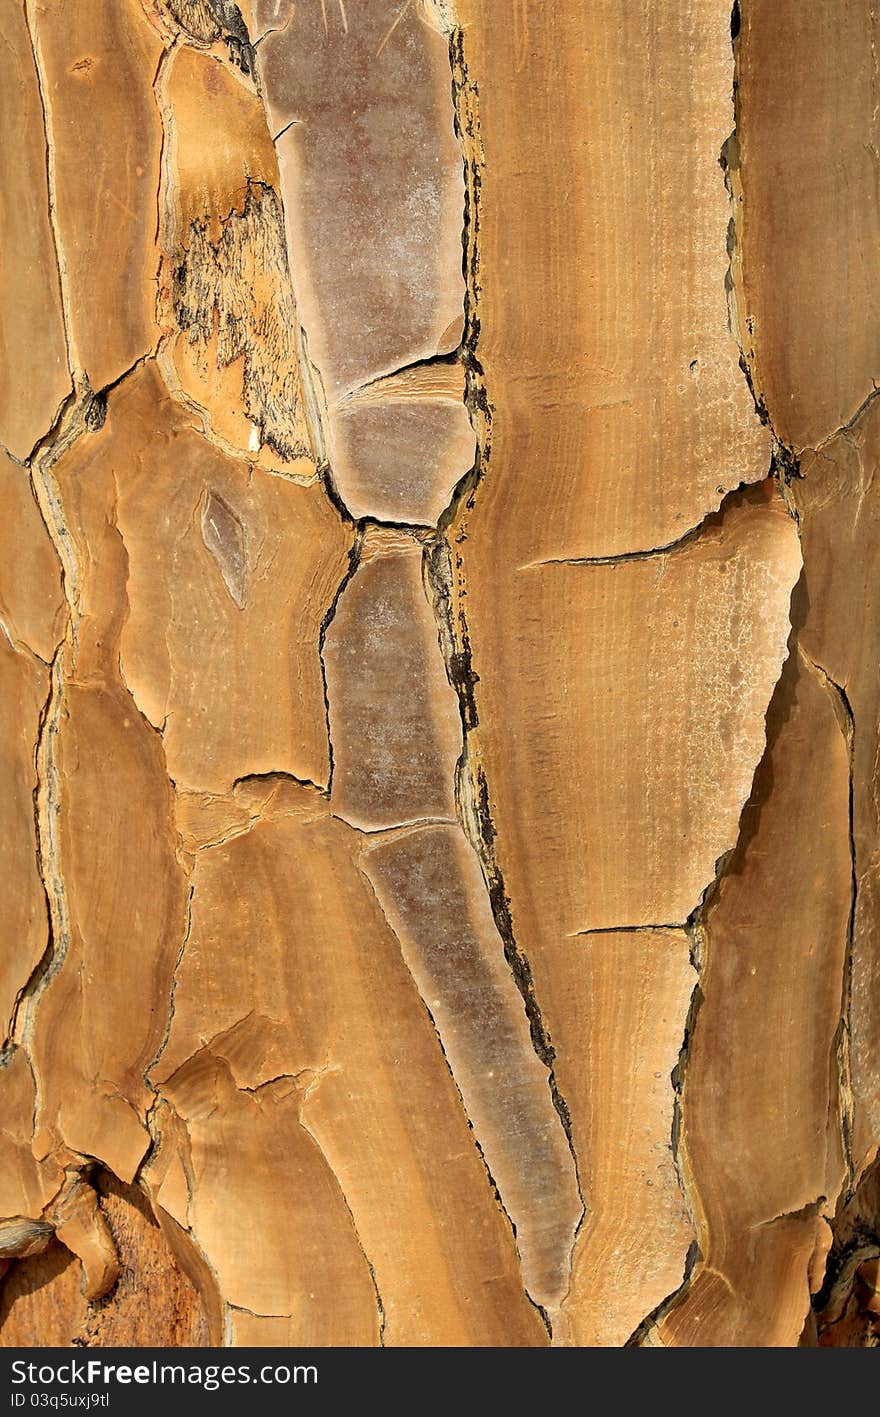 Close-up of the yellow, papery bark of a Quiver tree (Aloe dichotoma) in the Namib desert landscape. Namibia. Close-up of the yellow, papery bark of a Quiver tree (Aloe dichotoma) in the Namib desert landscape. Namibia